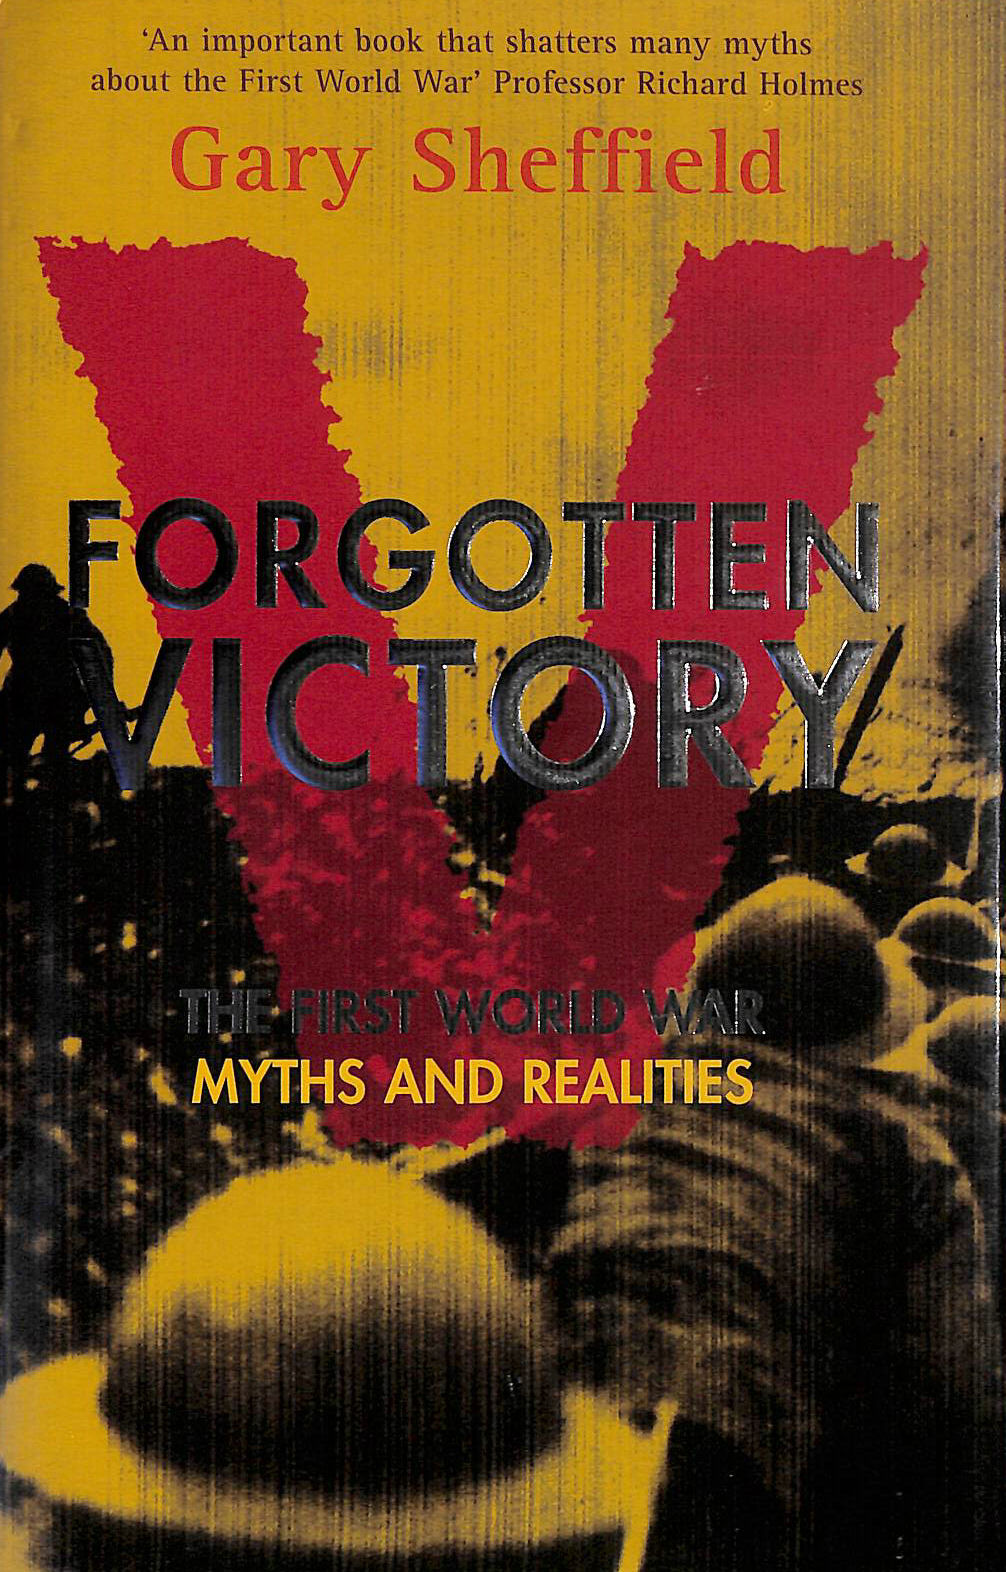 SHEFFIELD, GARY - Forgotten Victory: The First World War: Myths and Realities